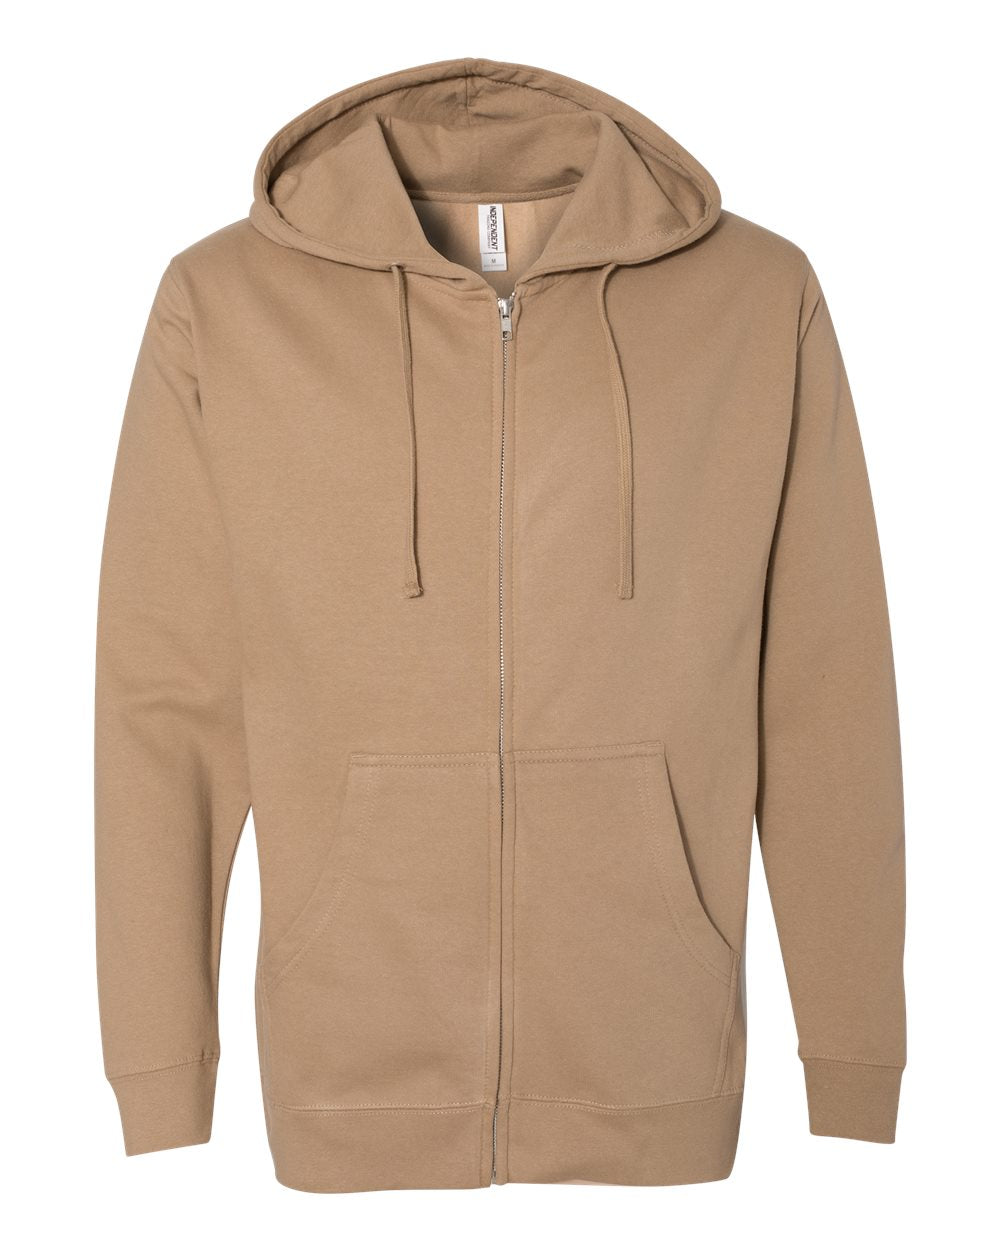 Pretreated Independent Trading Co. SS4500Z Midweight Full-Zip Hooded Sweatshirt